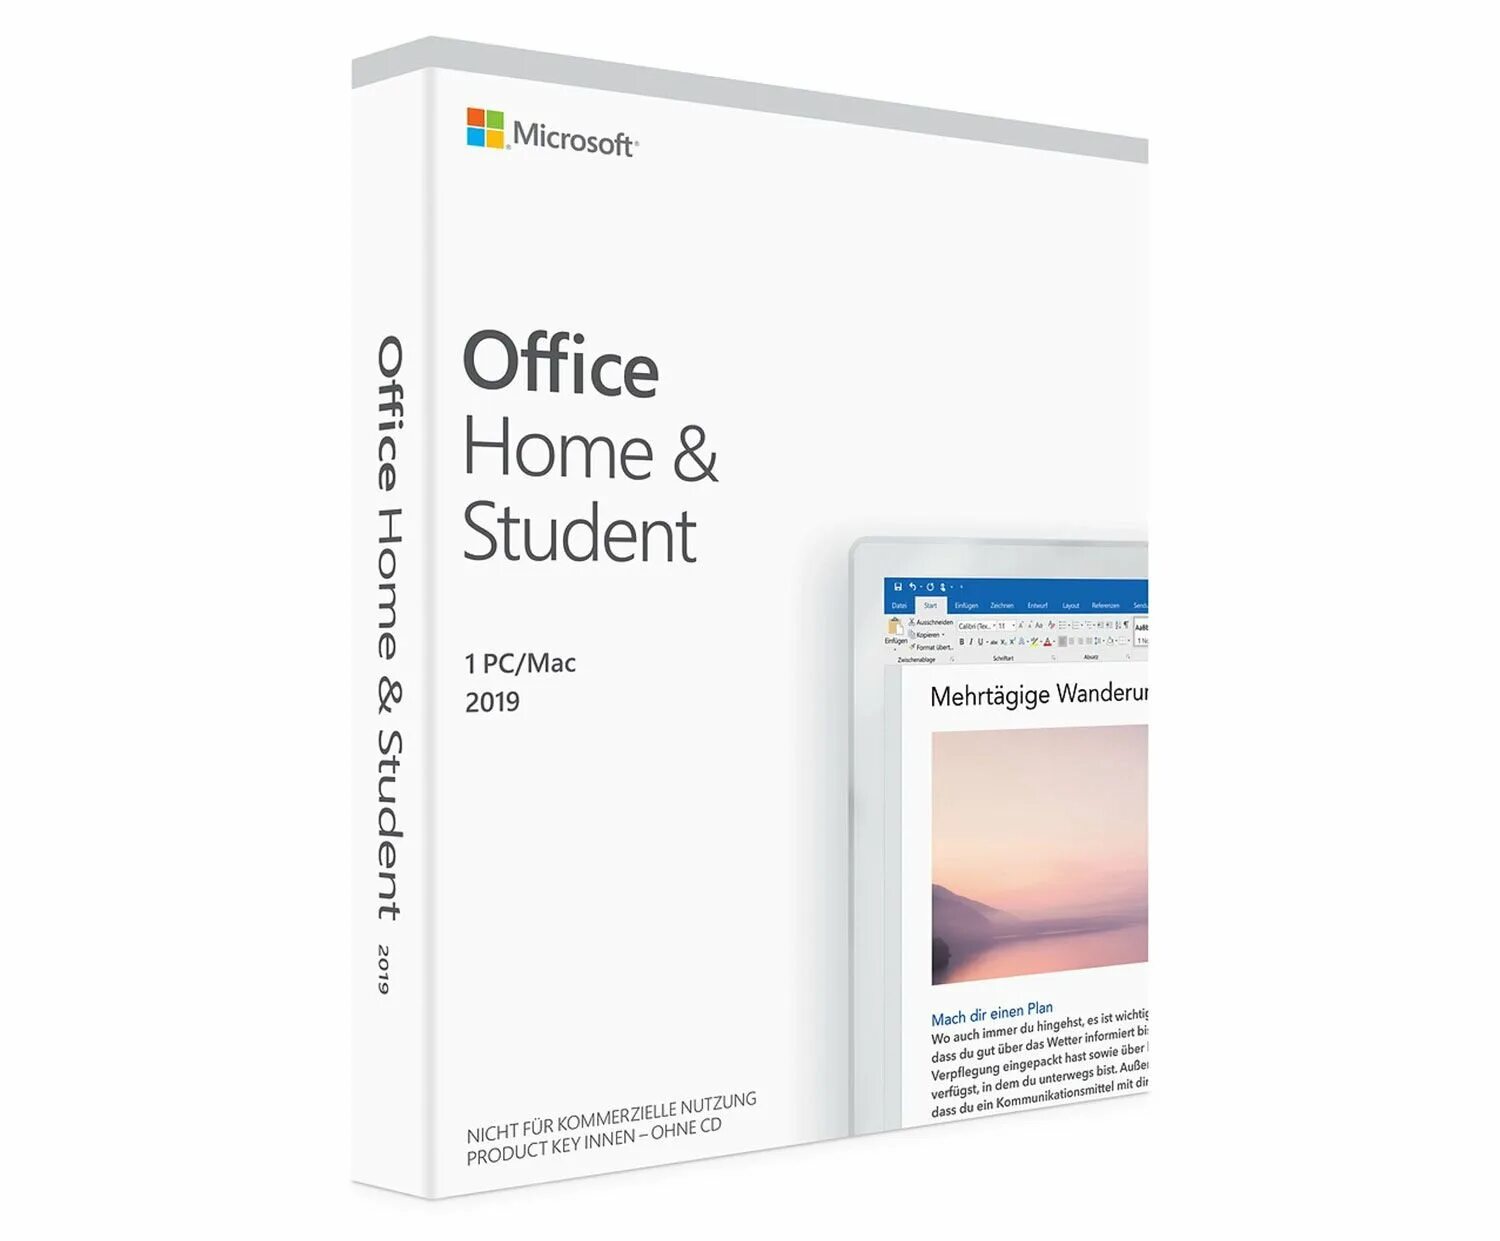 Office 2019 Home and student. Microsoft Office для дома и бизнеса 2019. MS Office 2019 Home and Business. Office 2019 Home and Business Mac.